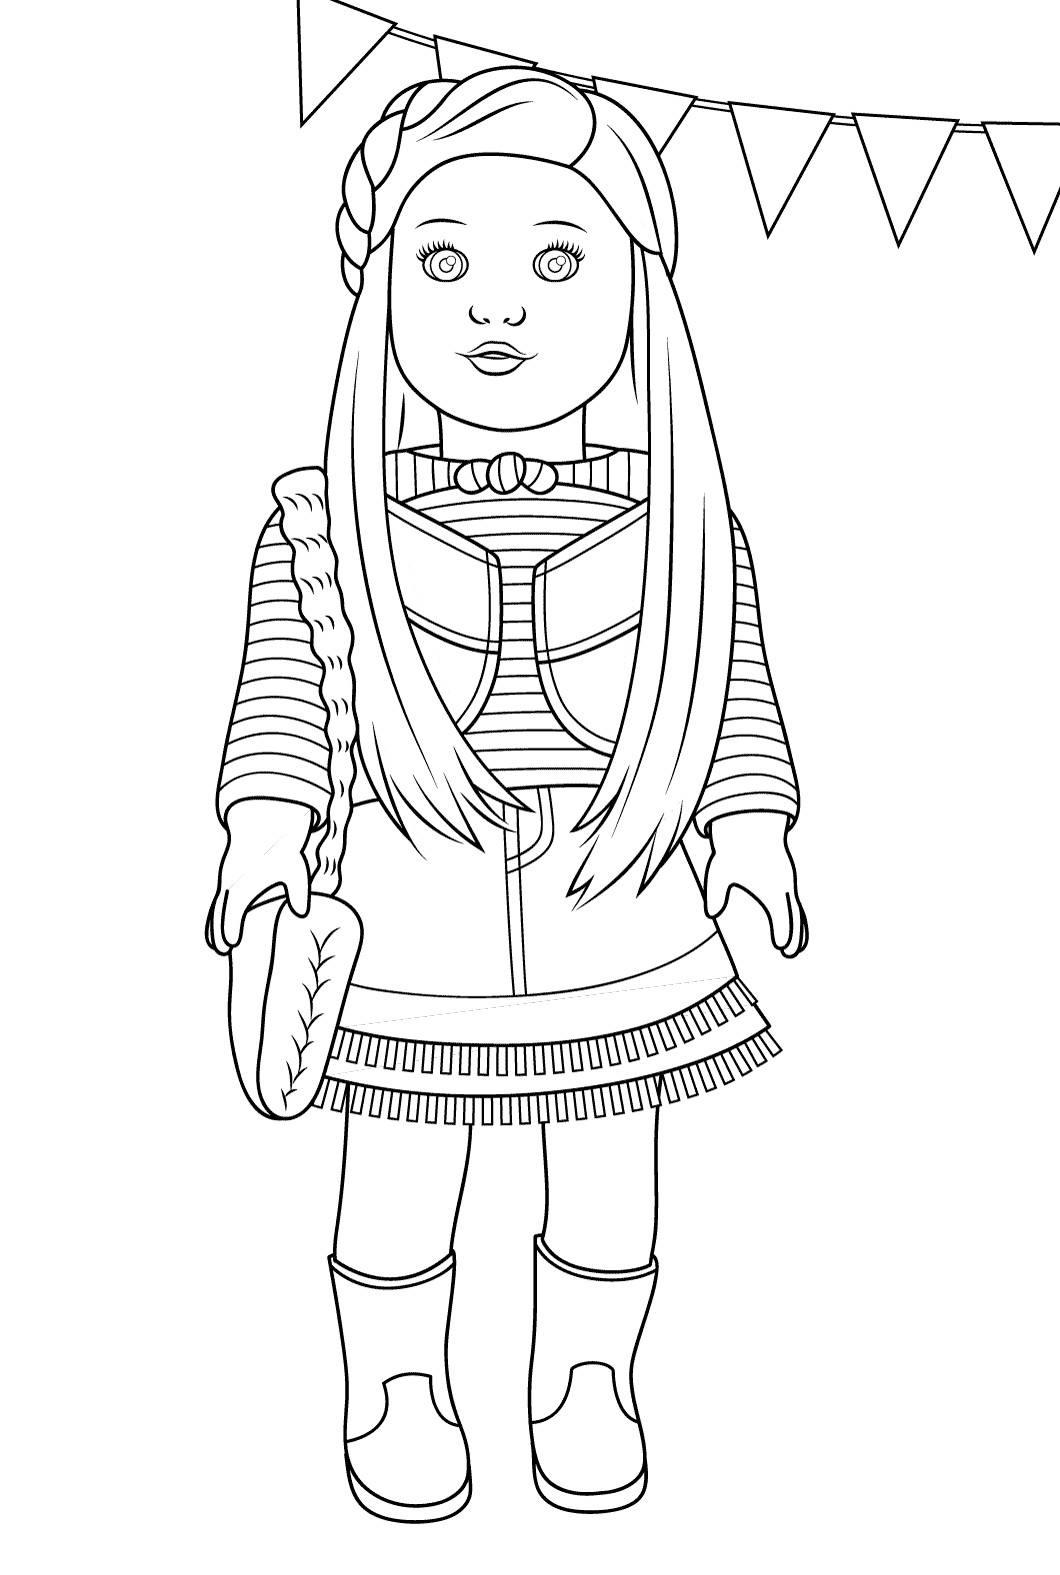 American Girl Coloring Sheet
 American Girl Coloring Pages Best Coloring Pages For Kids